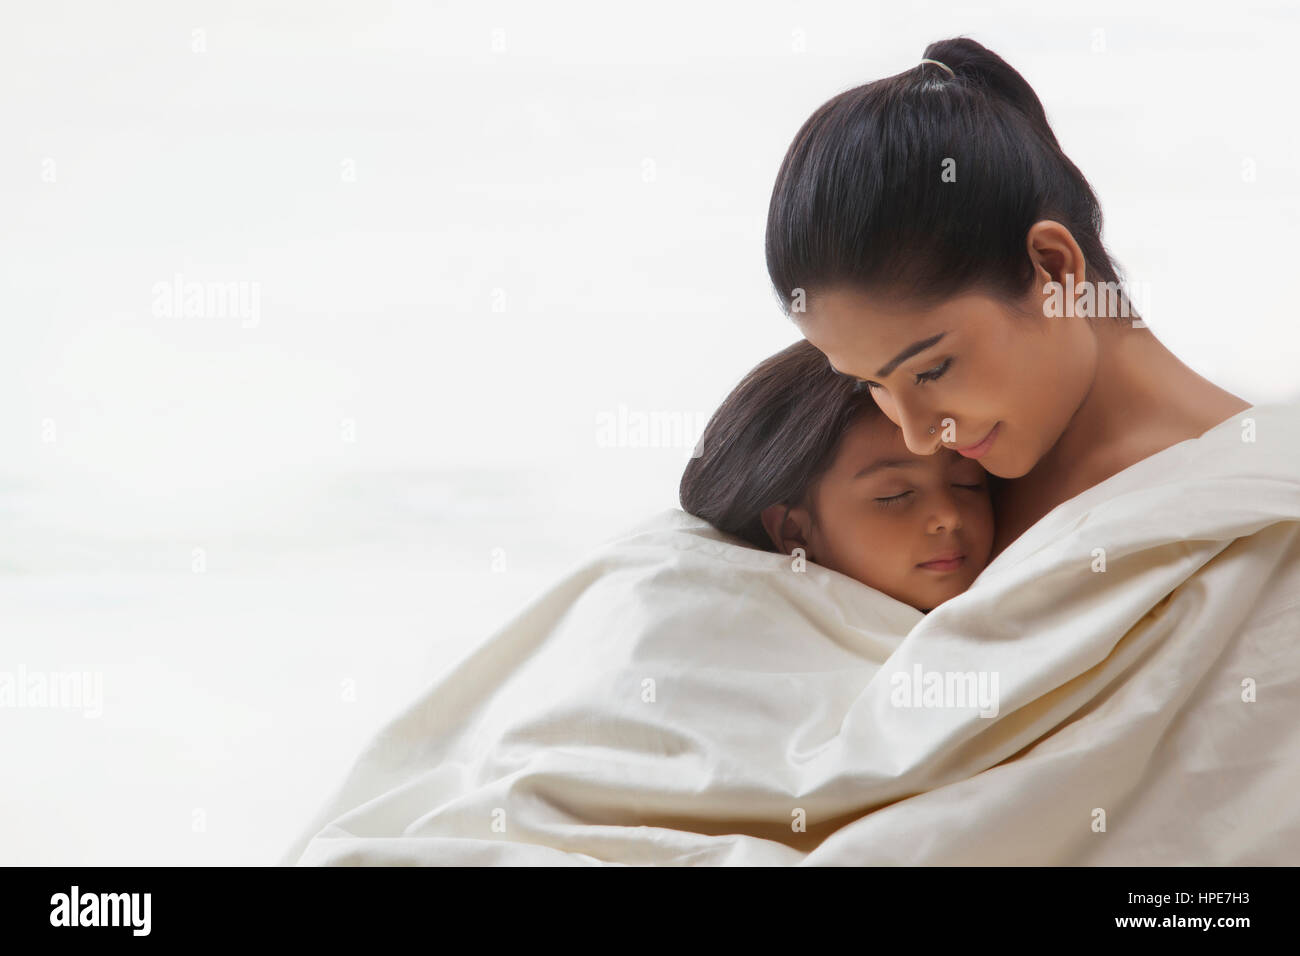 Mother and daughter wrapped in a blanket Stock Photo